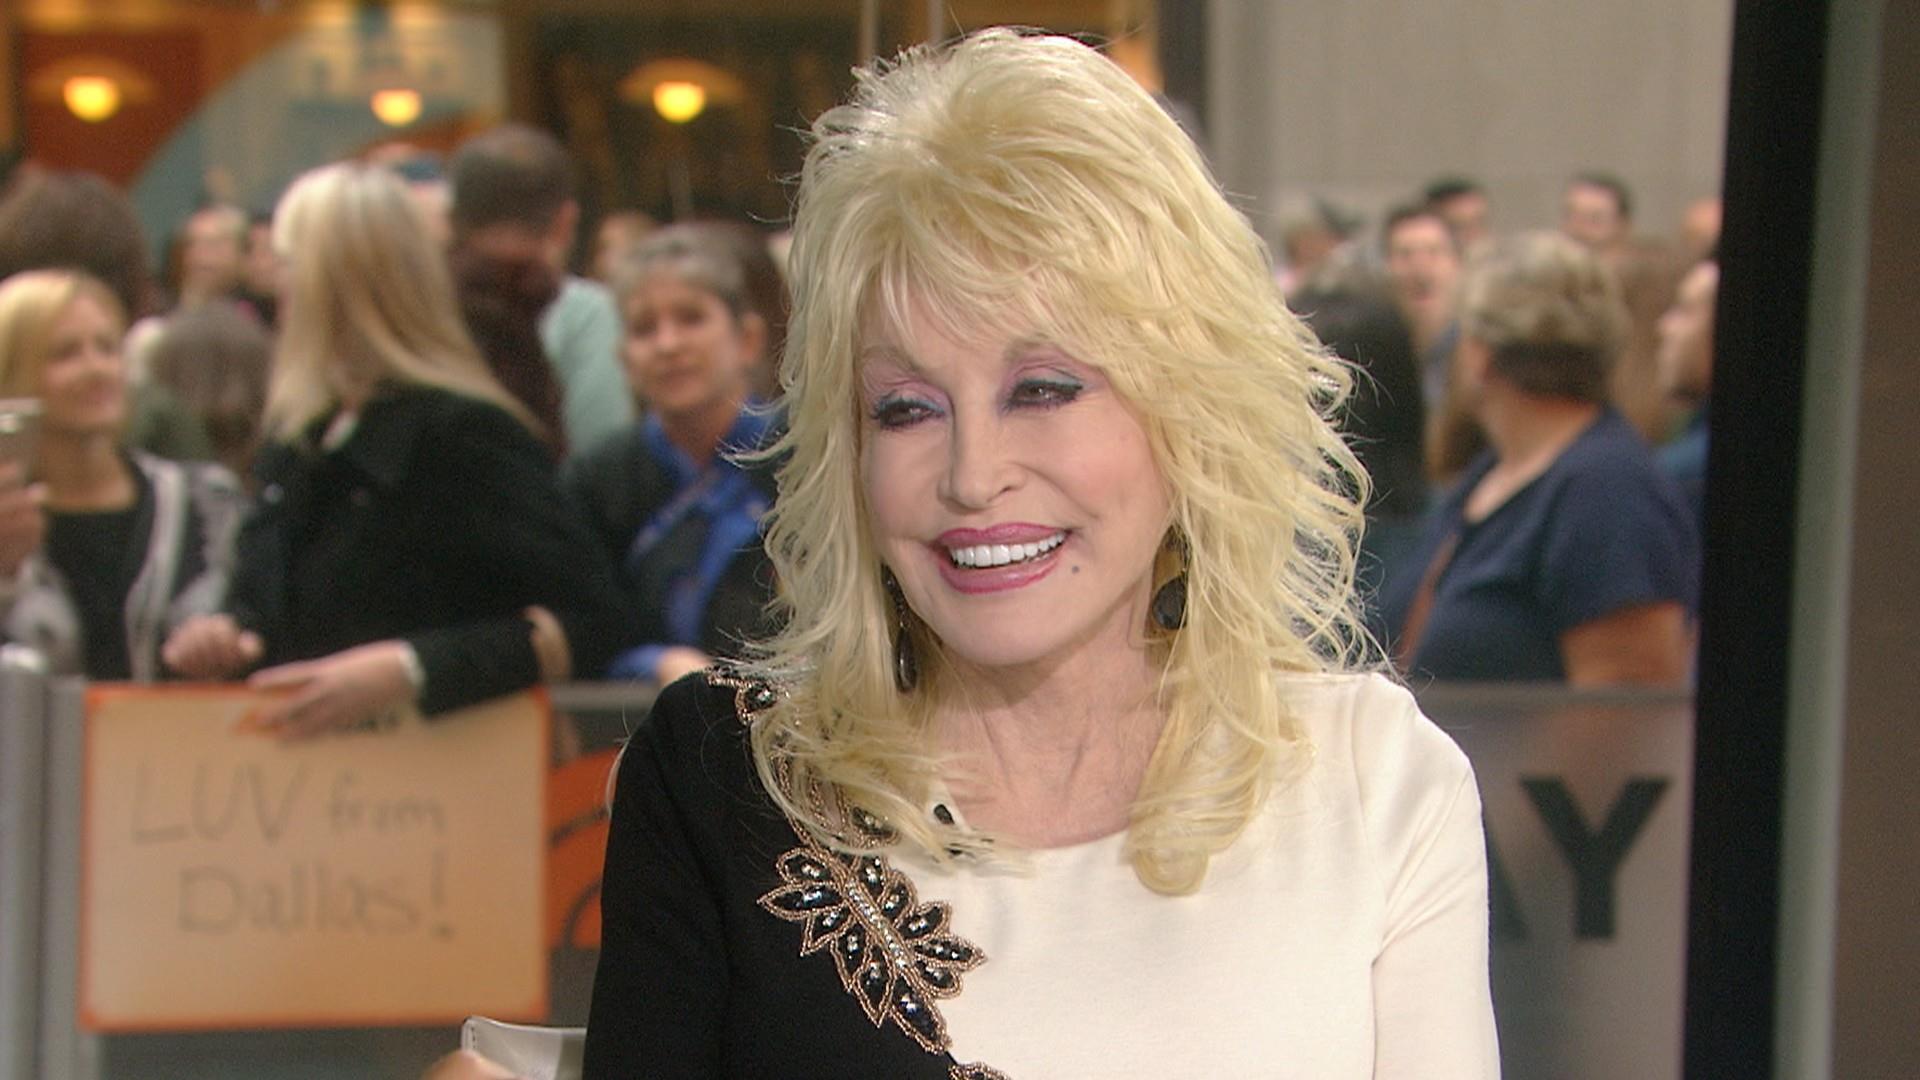 Dolly Parton talks about her new children's album 'I Believe in You' and  bullying